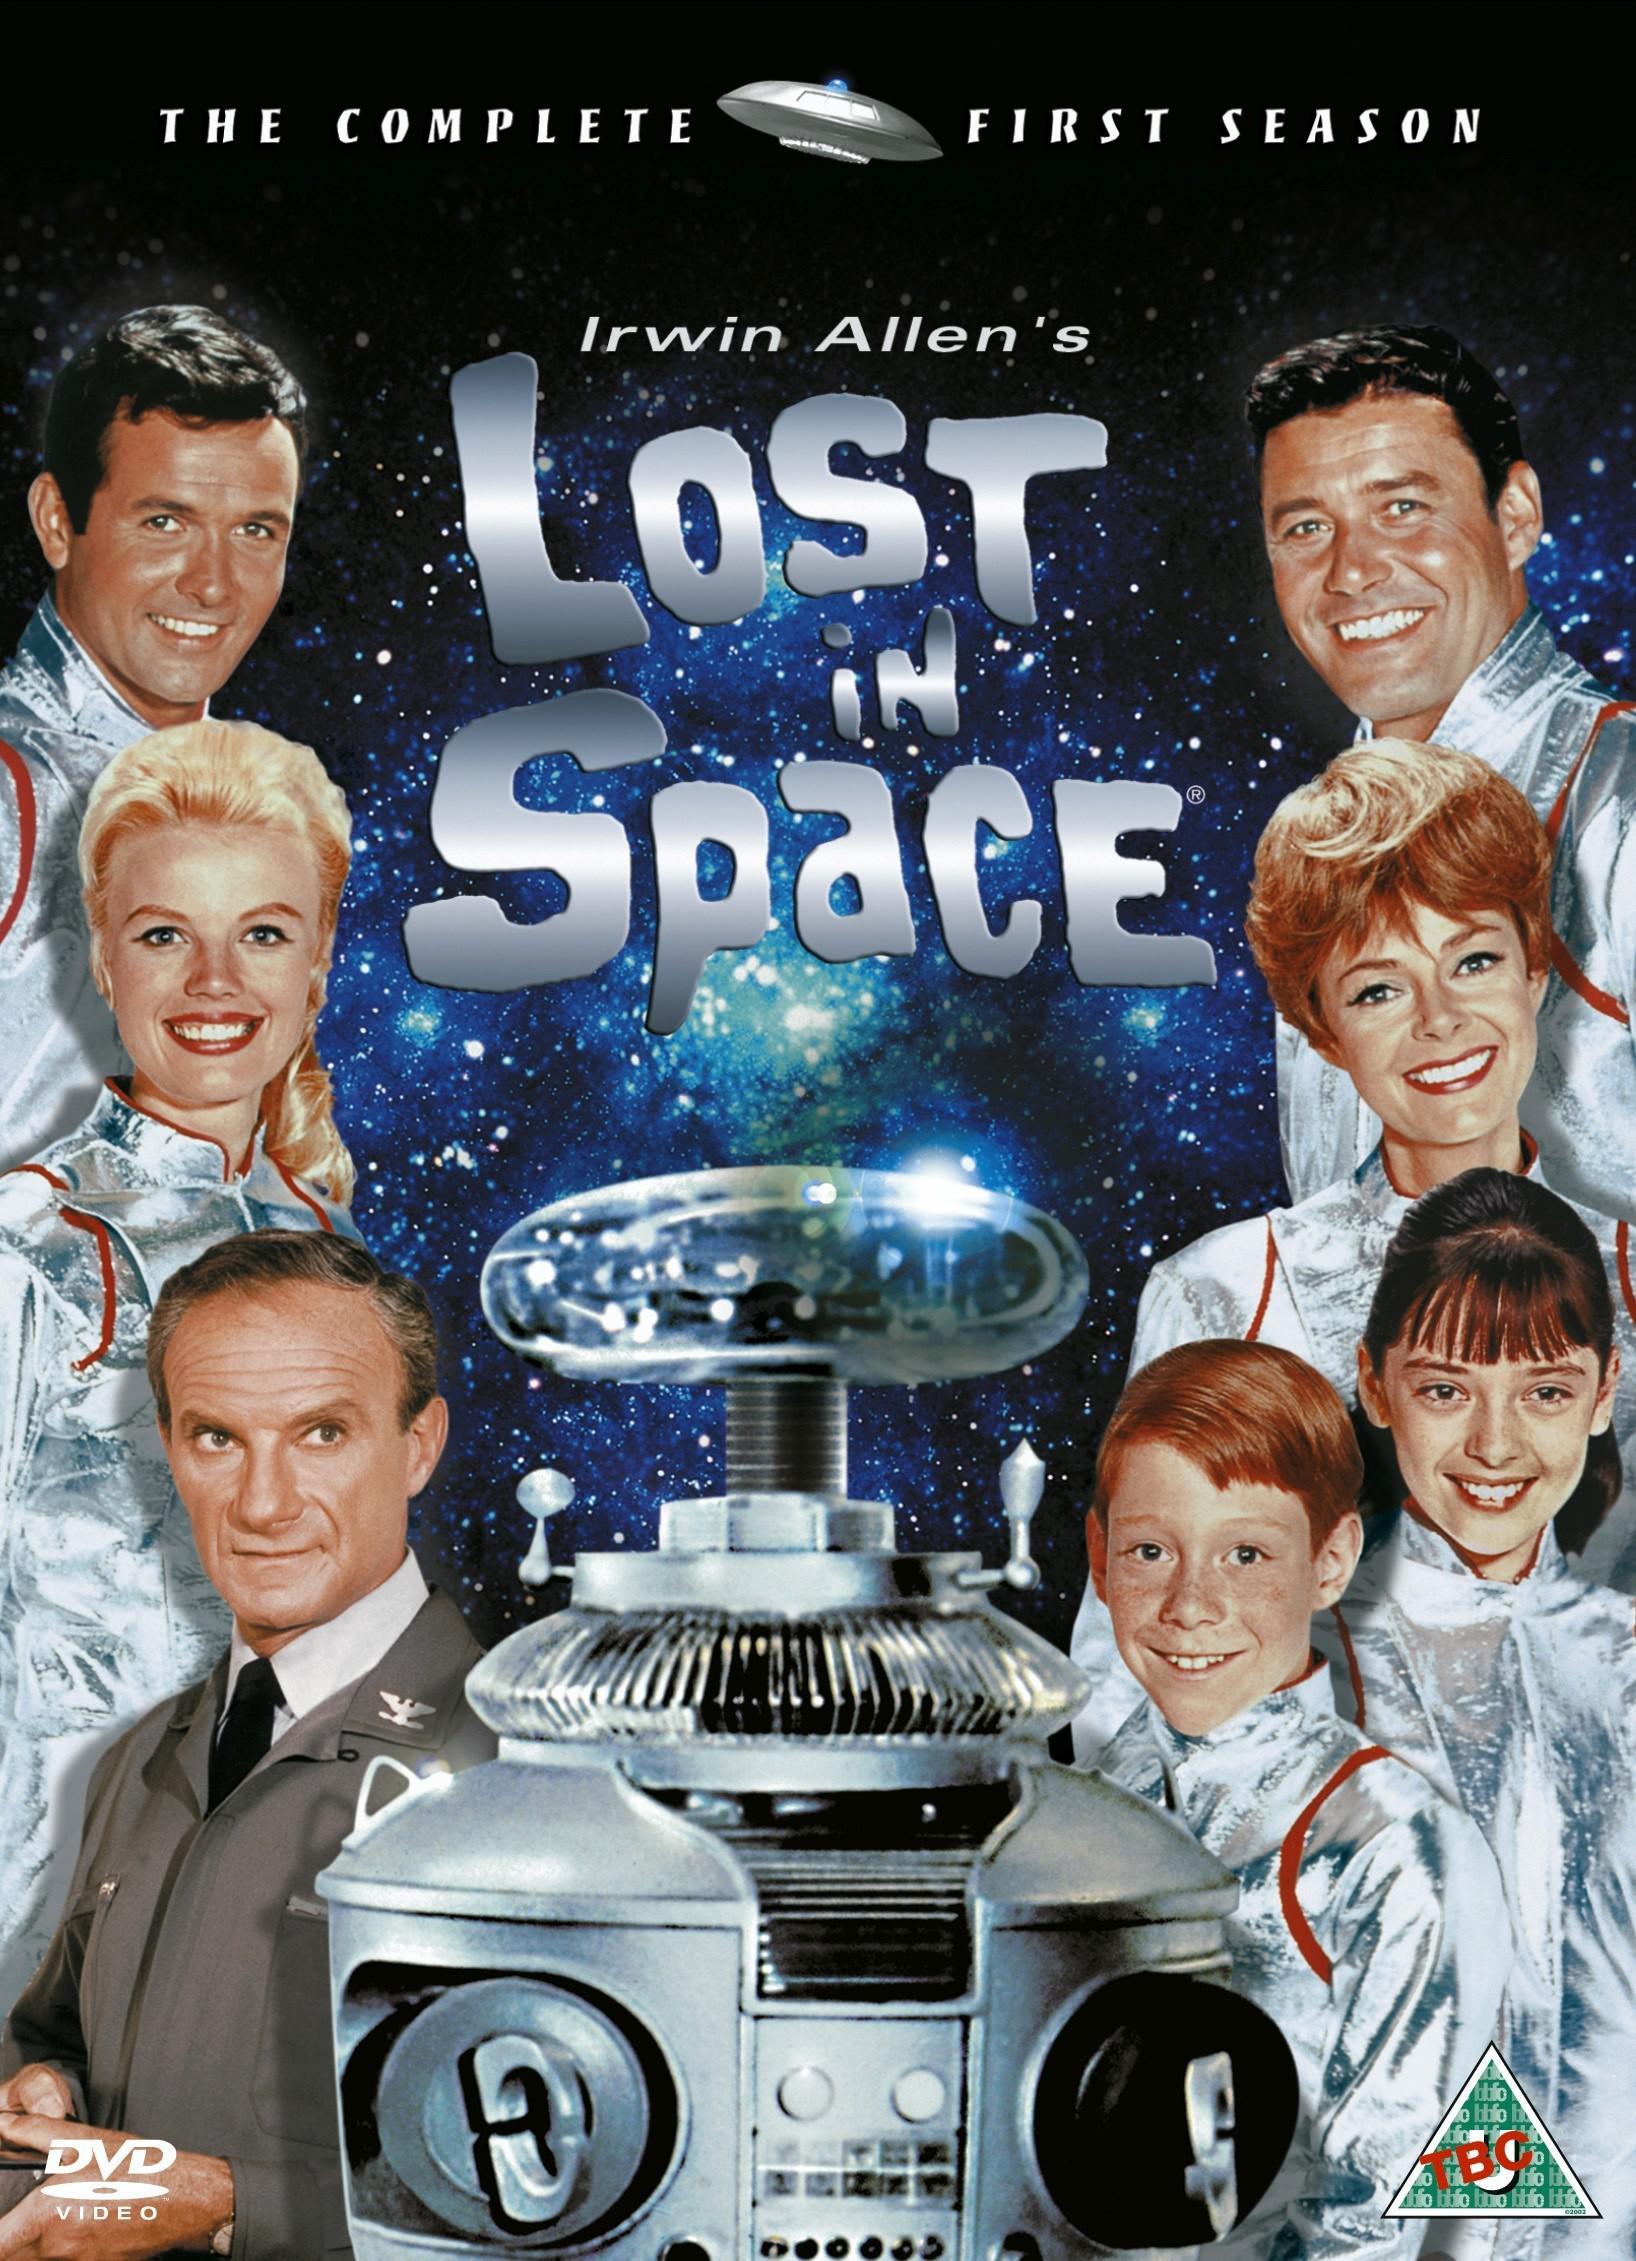 ”Lost in space”